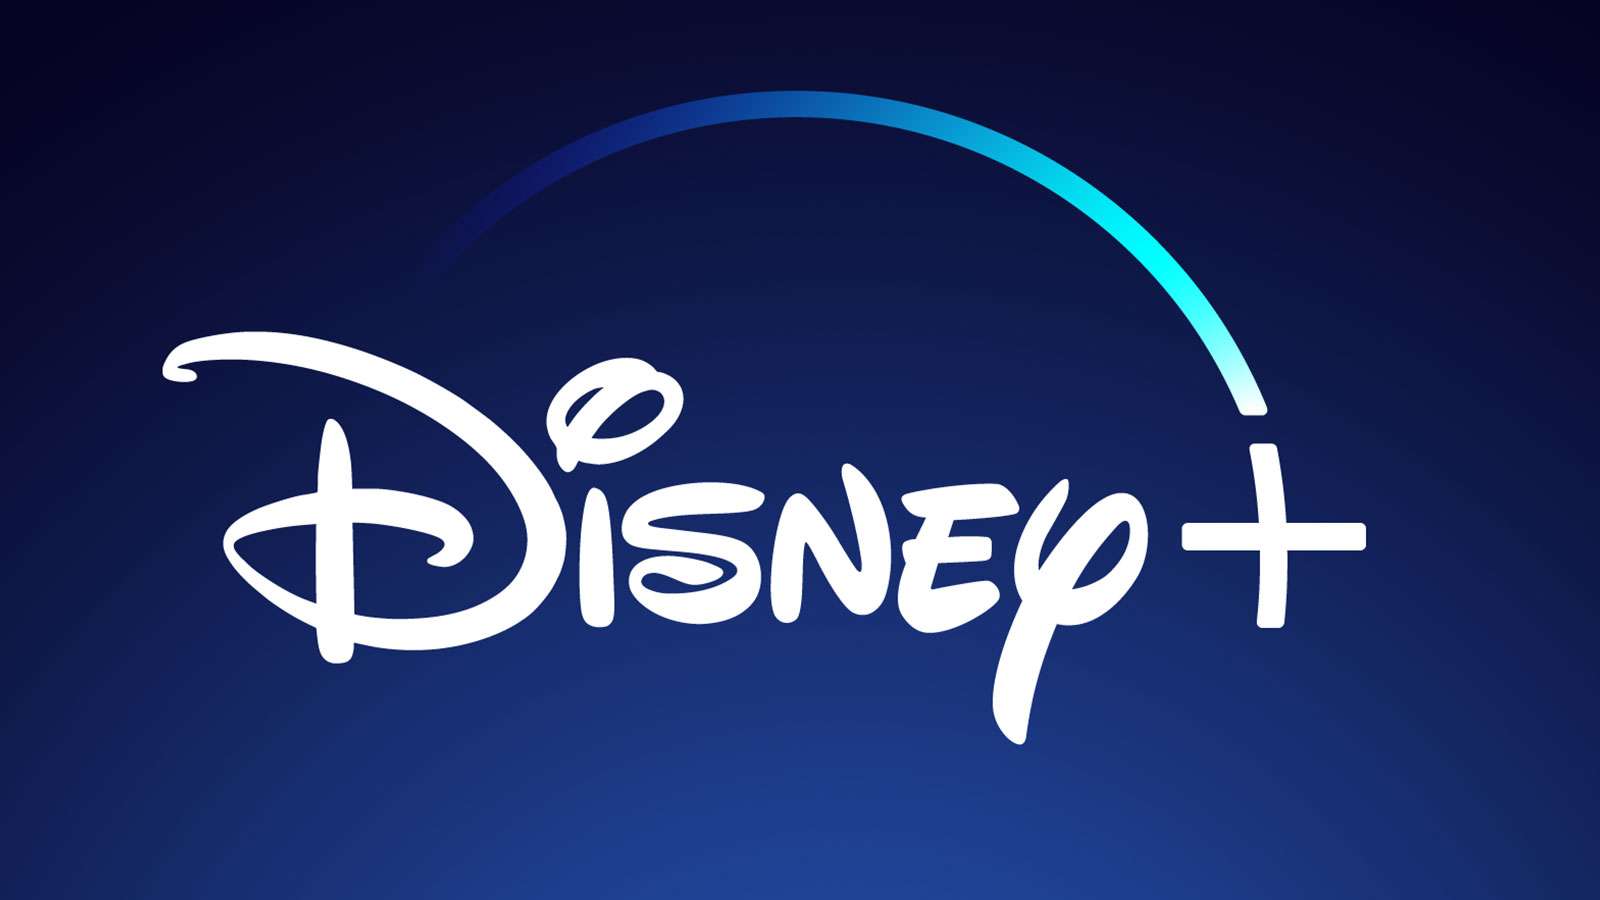 Disney+ What is new this month